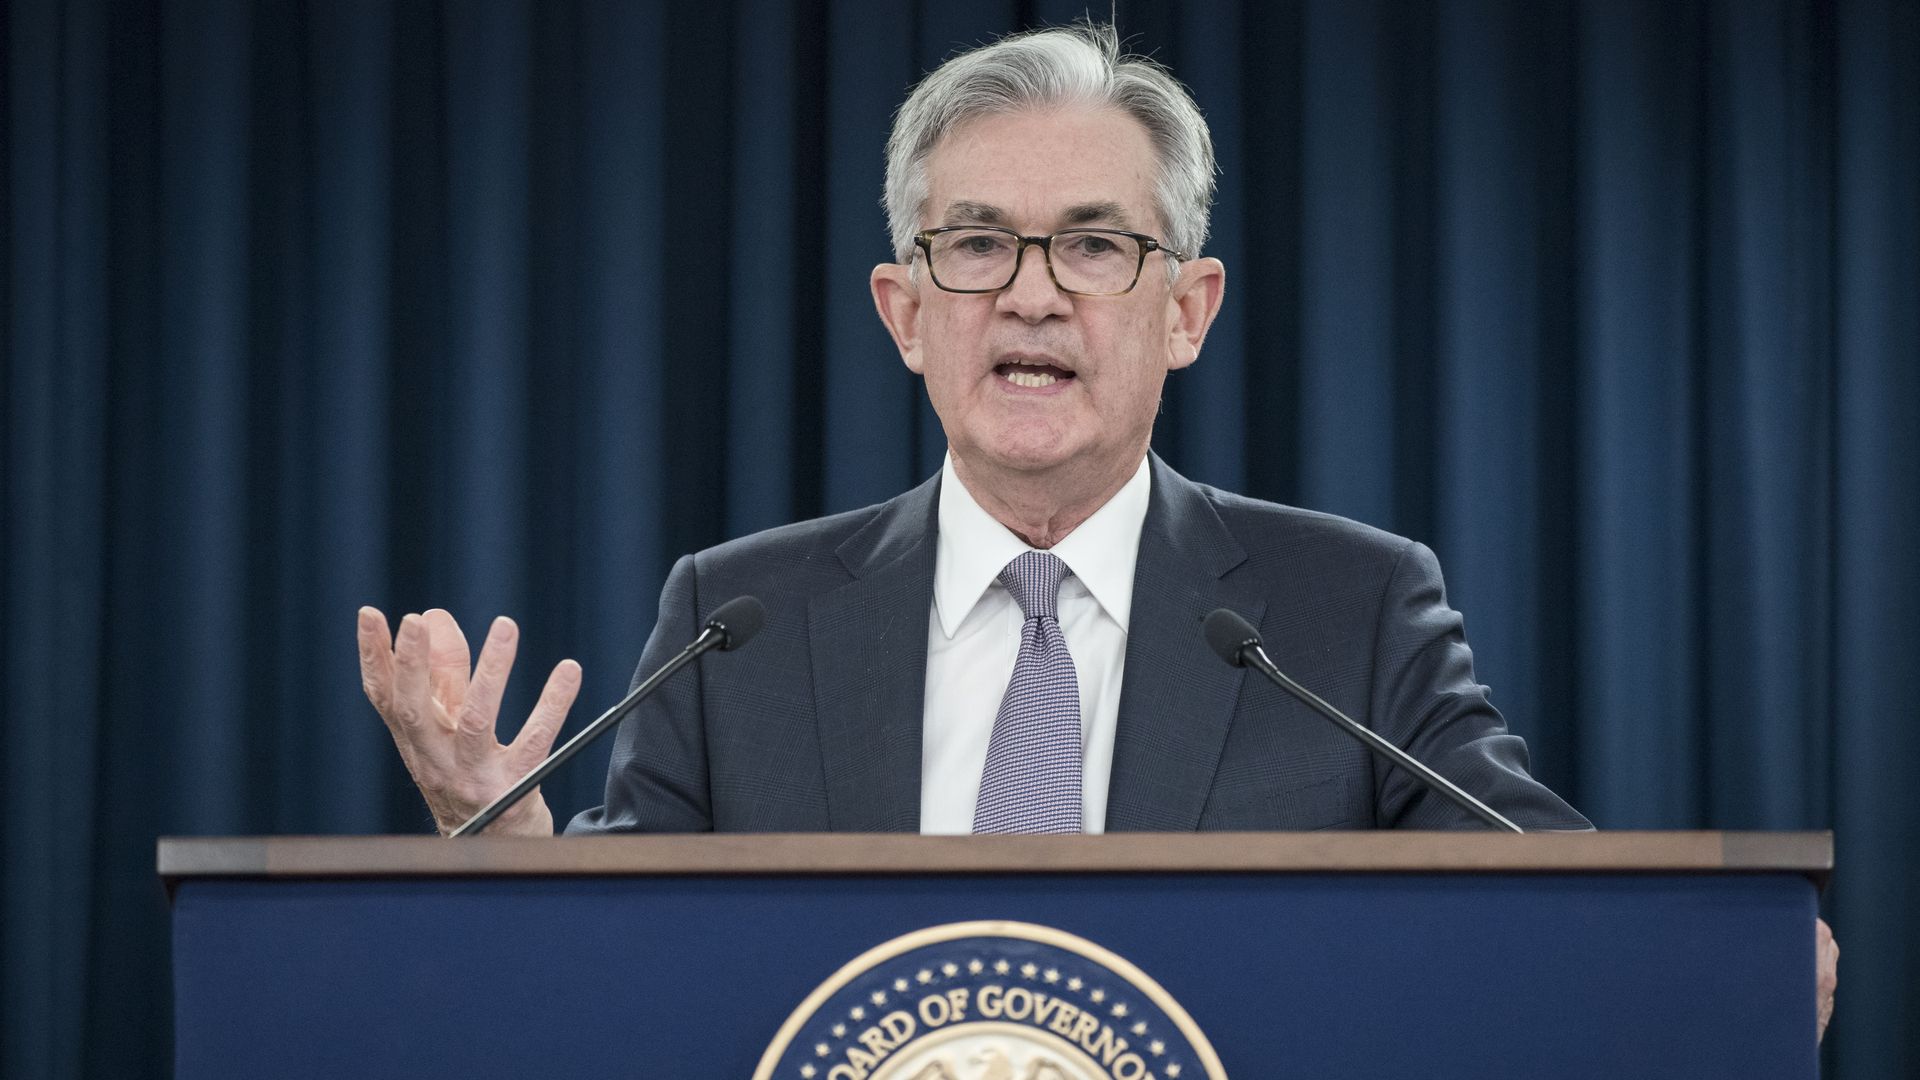 Federal Reserve chairman Jerome Powell stands at a podium at a press conference 